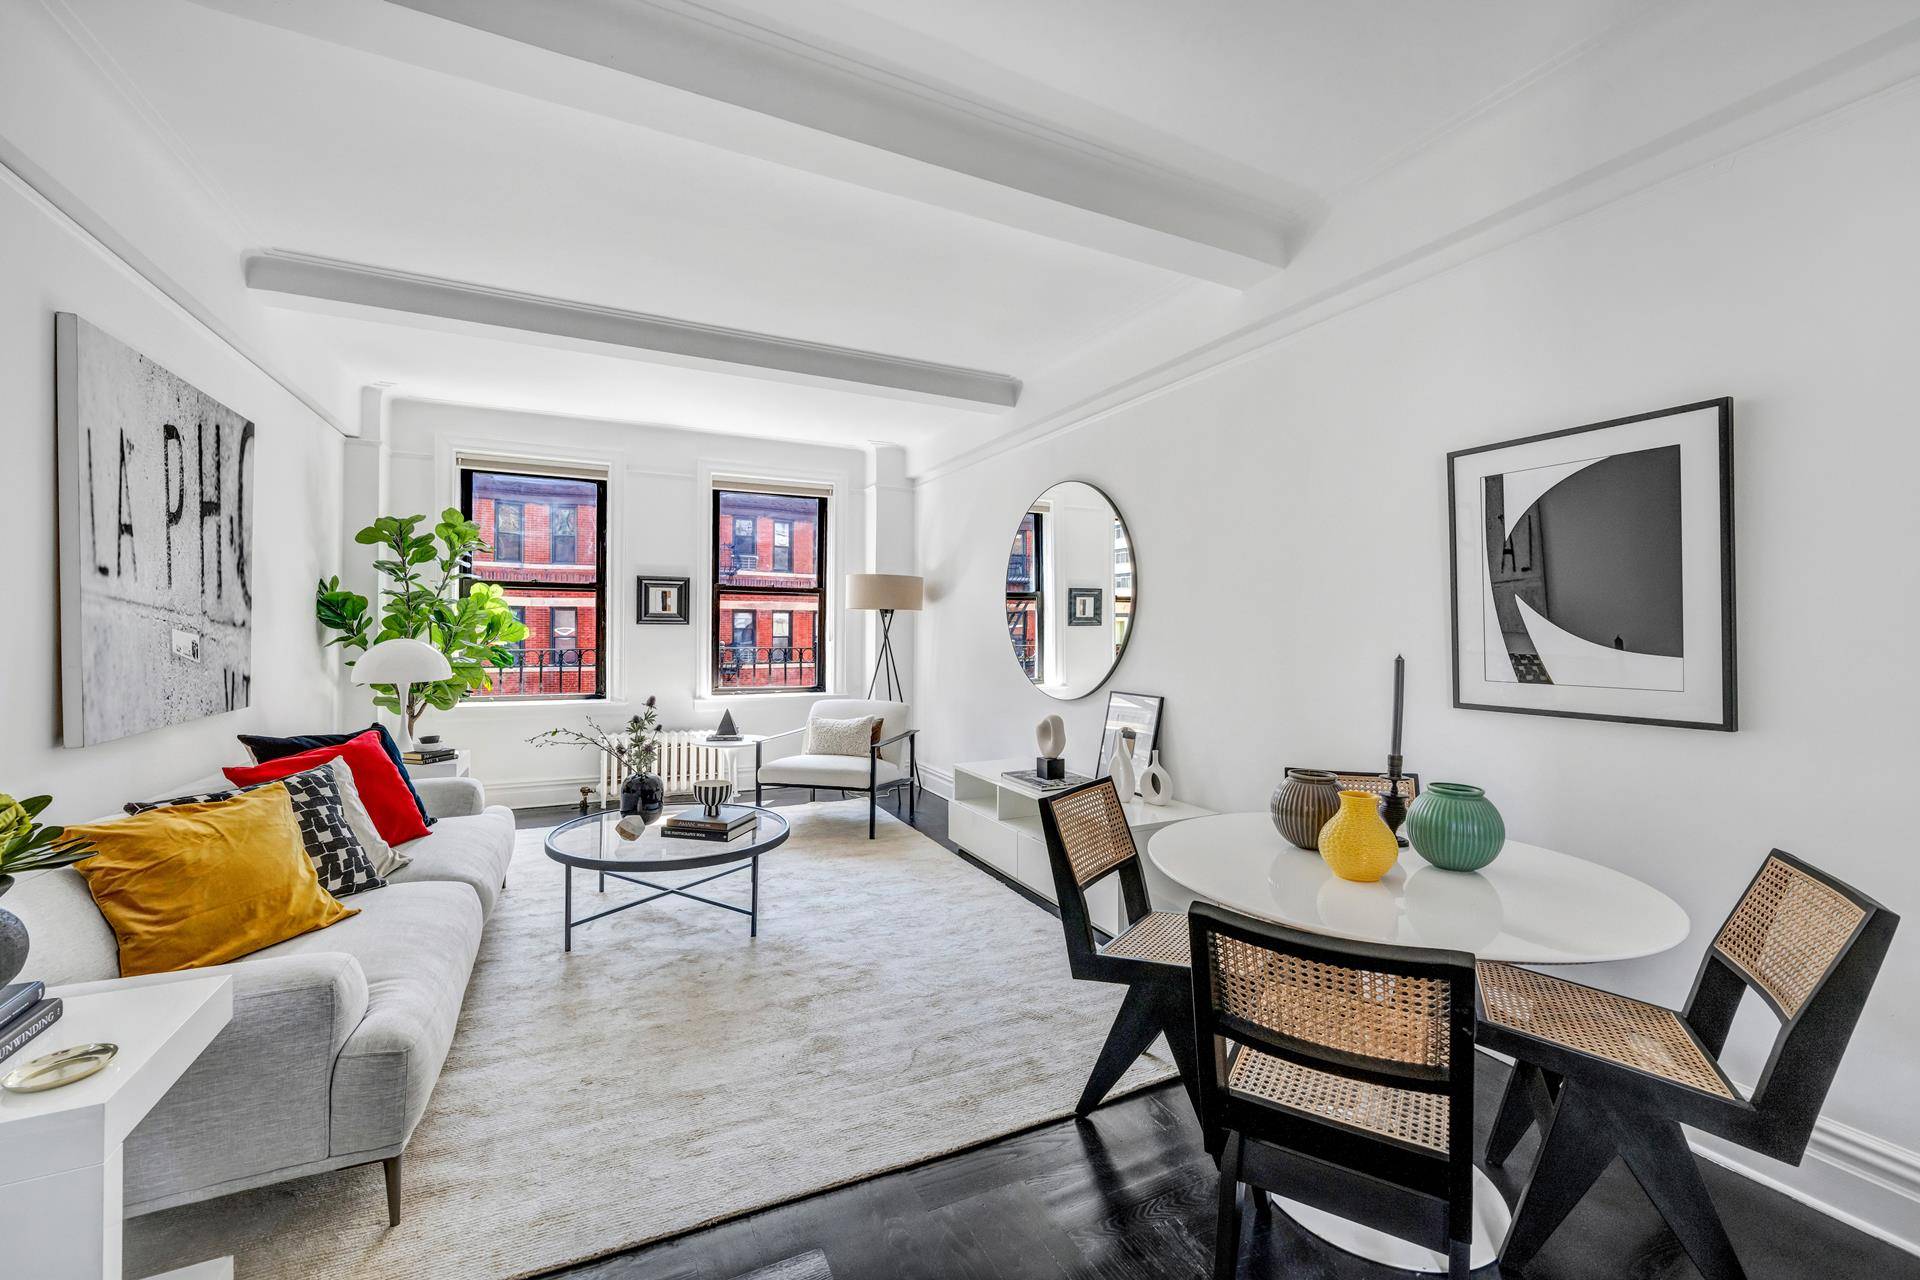 QUIET LUXURY ON PRIME CARNEGIE HILL Spacious, bright, elegant and chic prewar 1 Bedroom, 1 Bathroom home in excellent condition on prime tree lined block off Lexington Avenue.